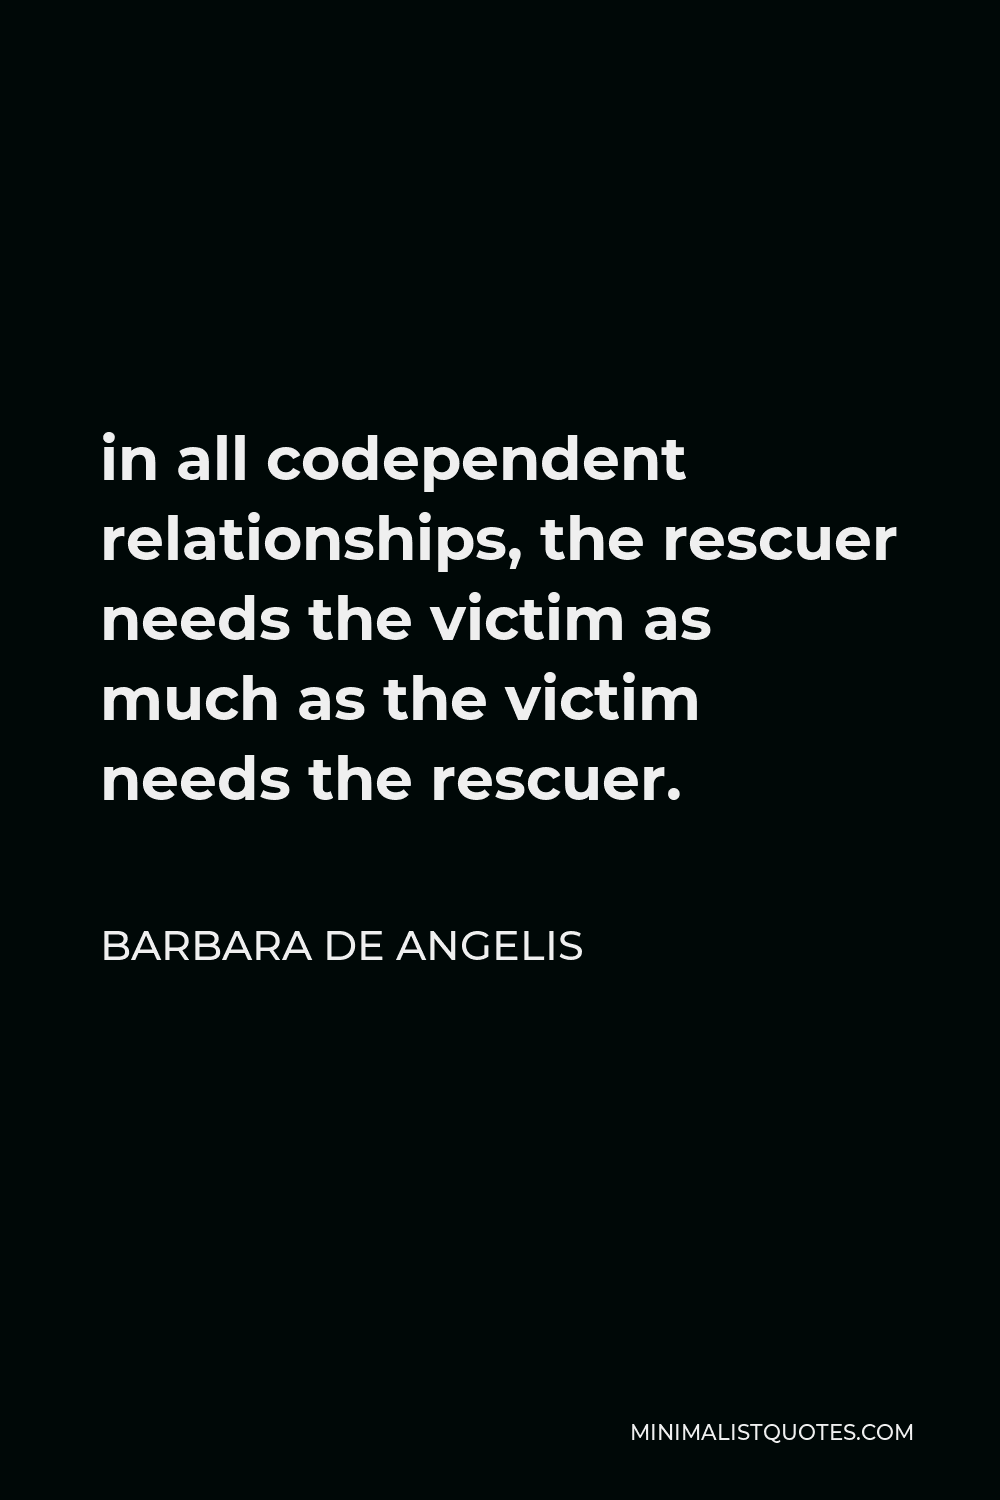 Barbara De Angelis Quote - in all codependent relationships, the rescuer needs the victim as much as the victim needs the rescuer.